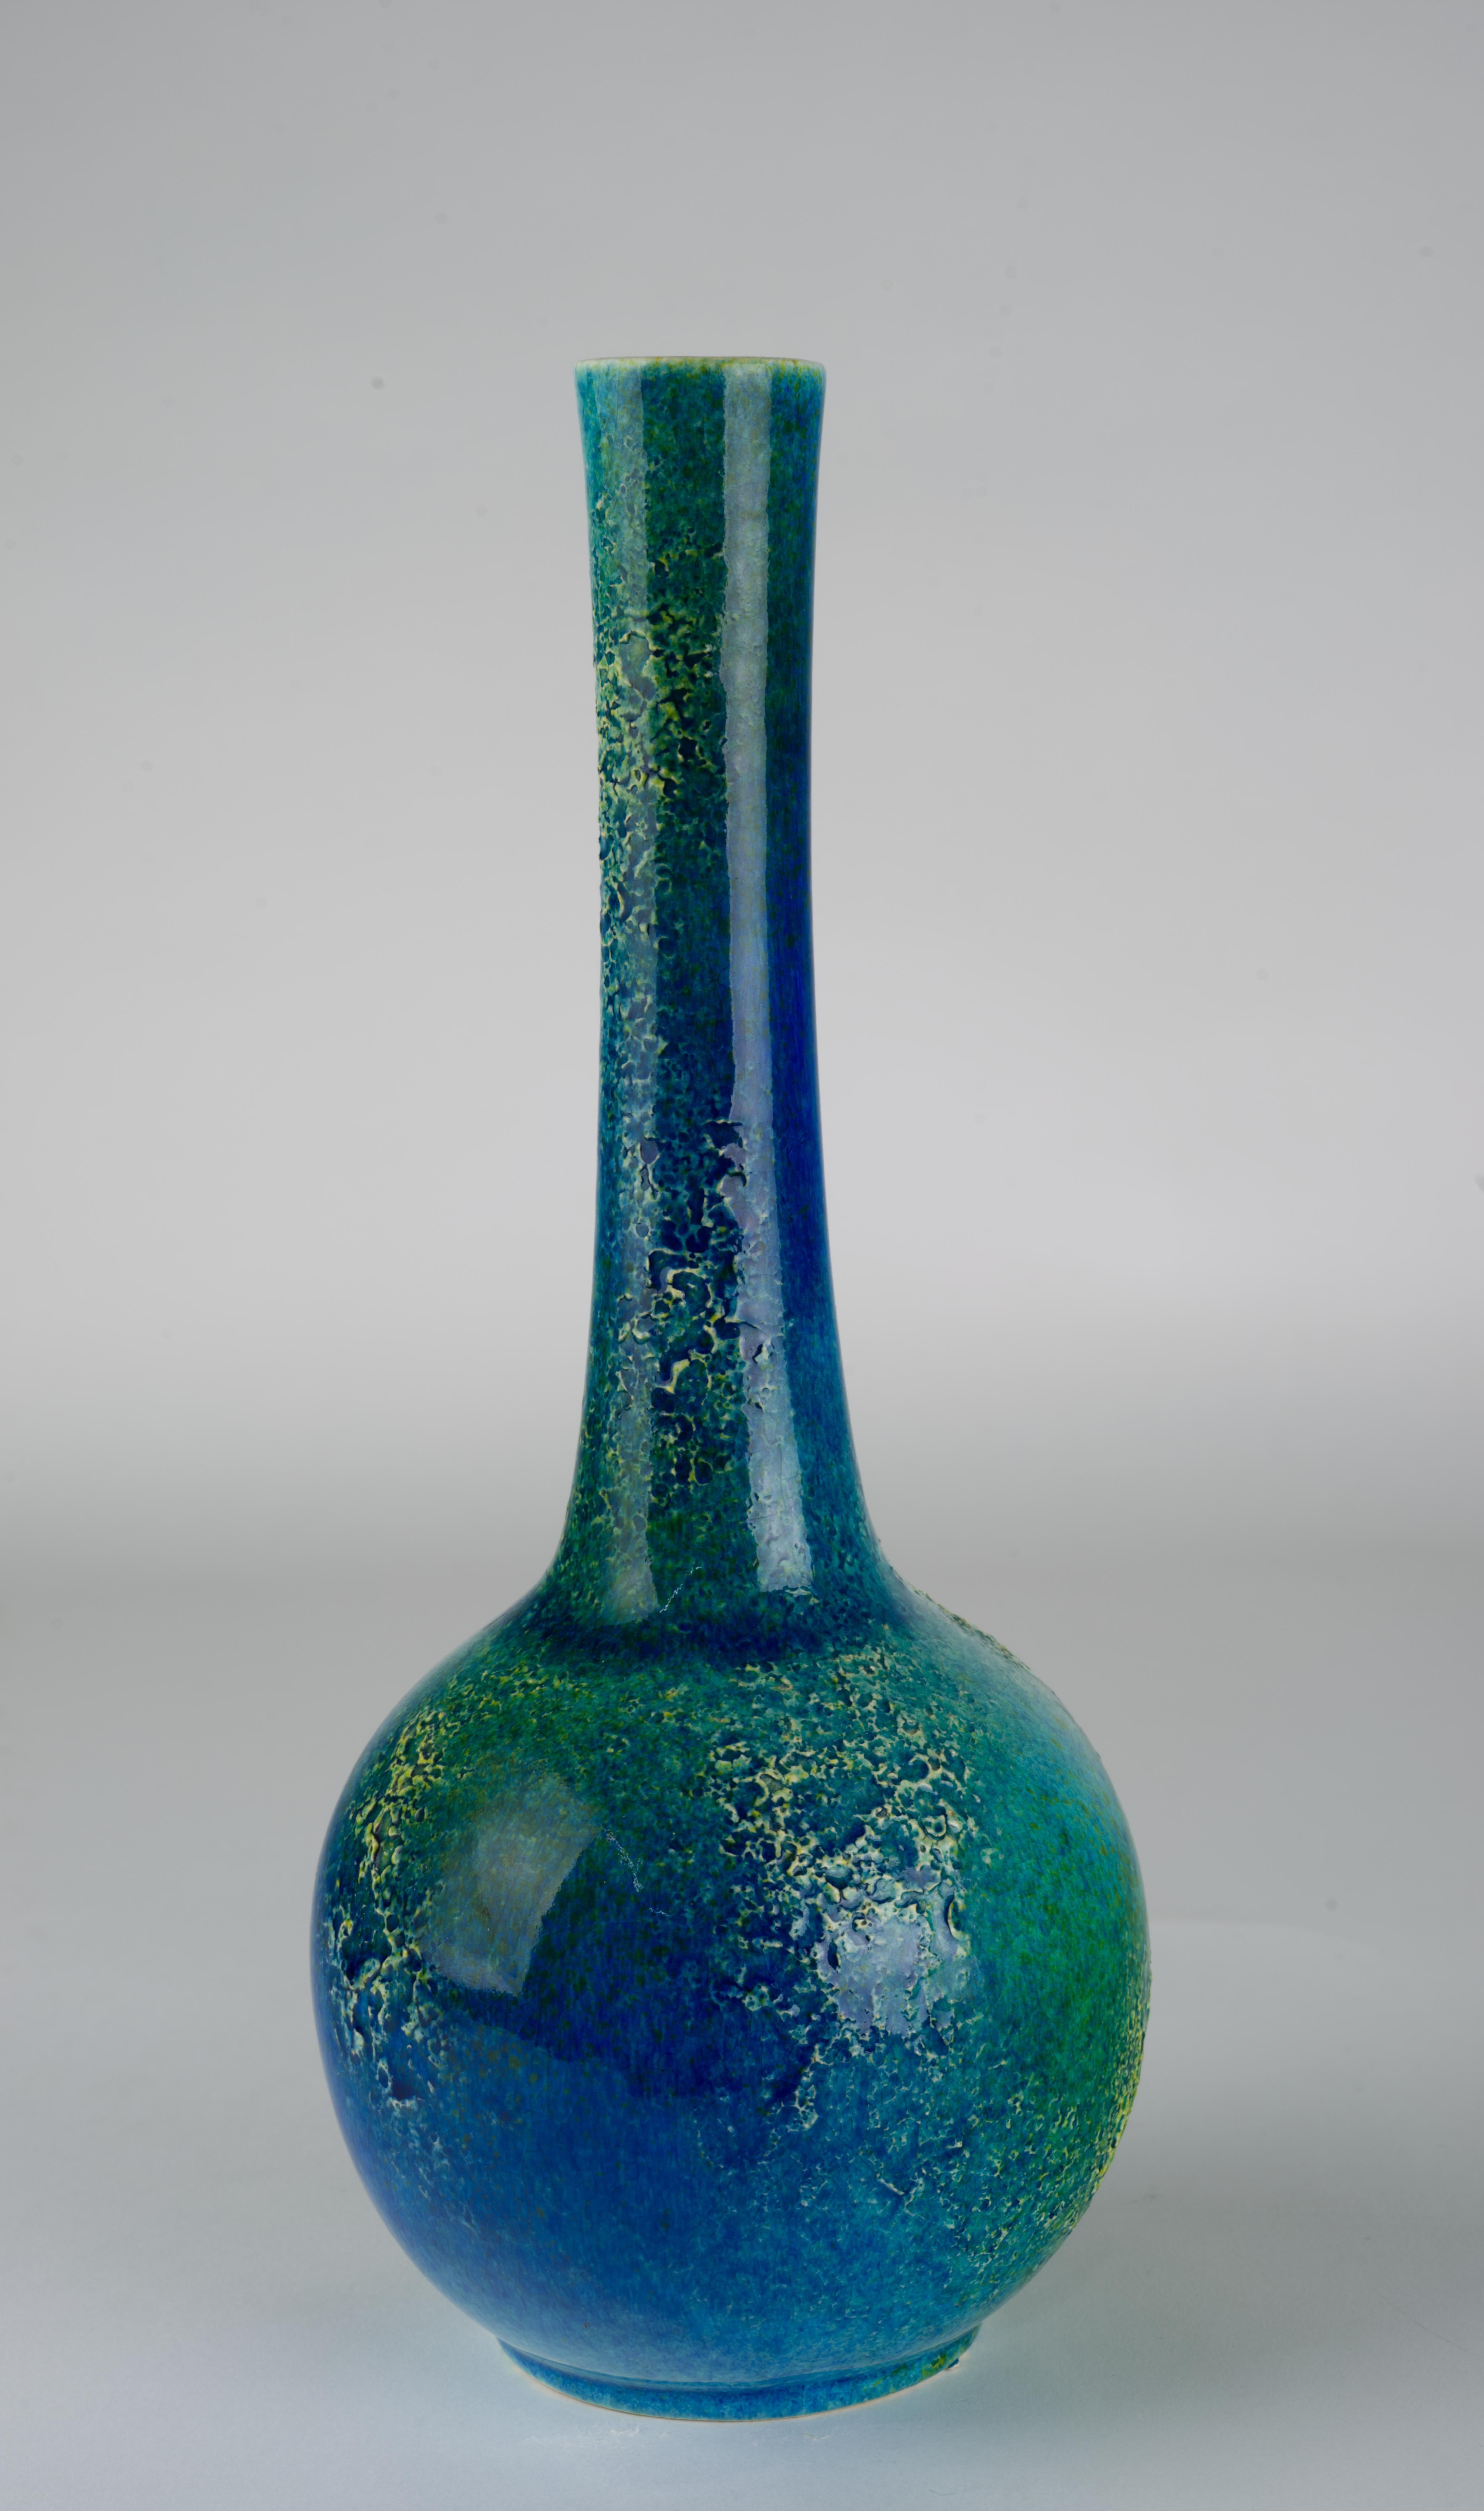  Vintage long neck vase was made by Royal Haeger in 1950s. It is decorated in glossy, complex blue teal crackle glaze with lighter, highly textured lava glaze accents, streaming in bands throughout the base and the neck of the vase and creating